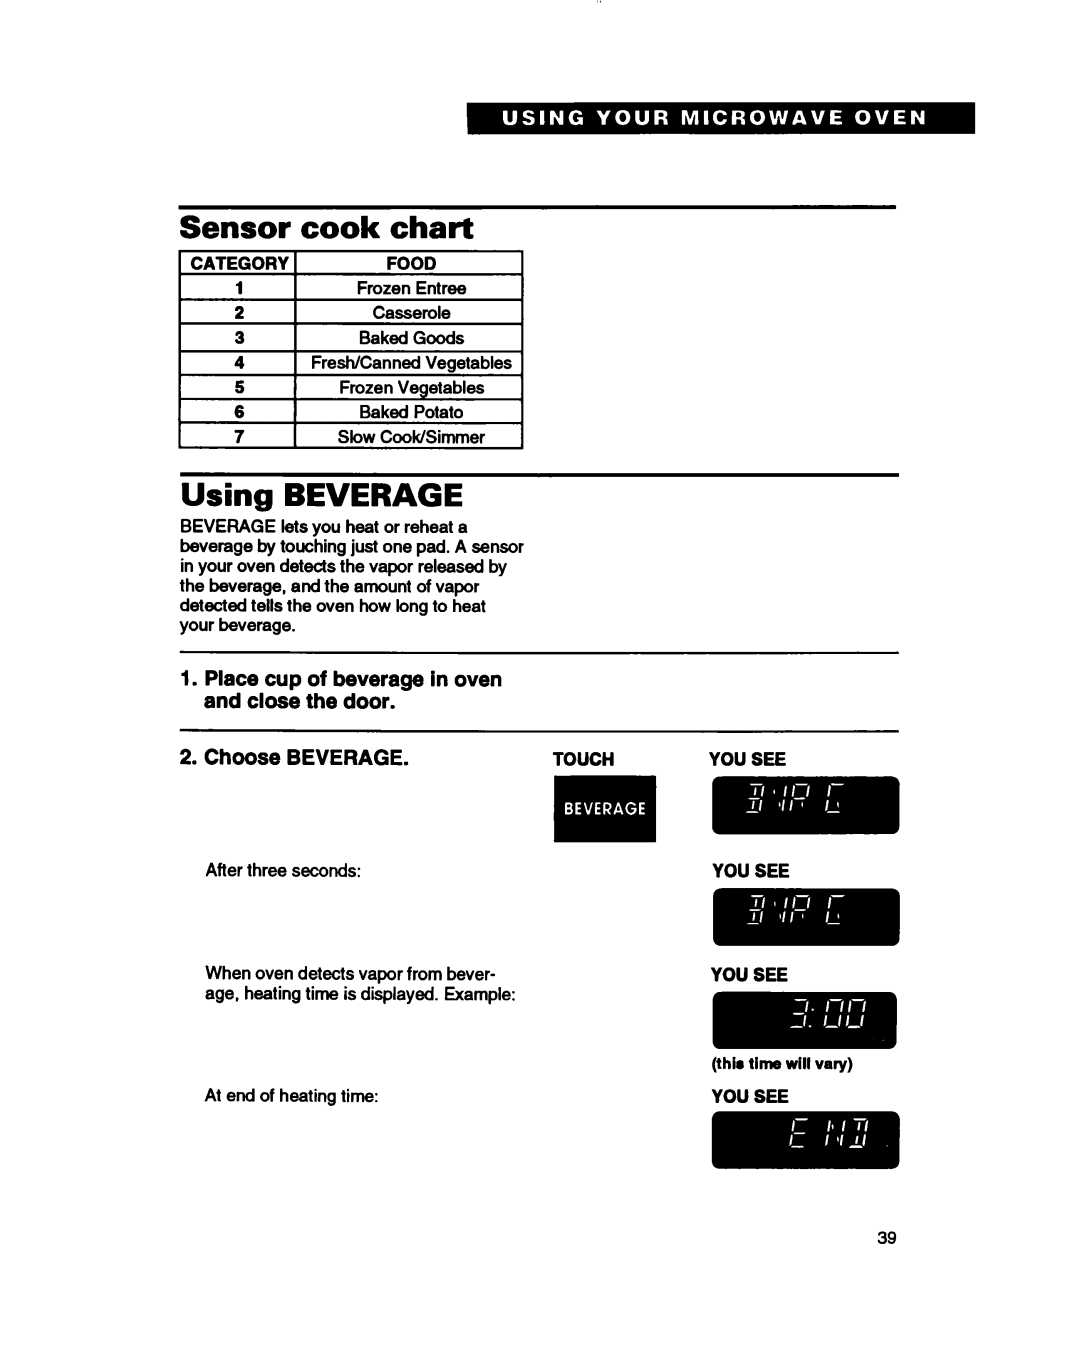 Whirlpool MH7115XB warranty Sensor cook chart, Using BEVERAGE, Choose BEVERAGE, thlr time will vary, Touch 